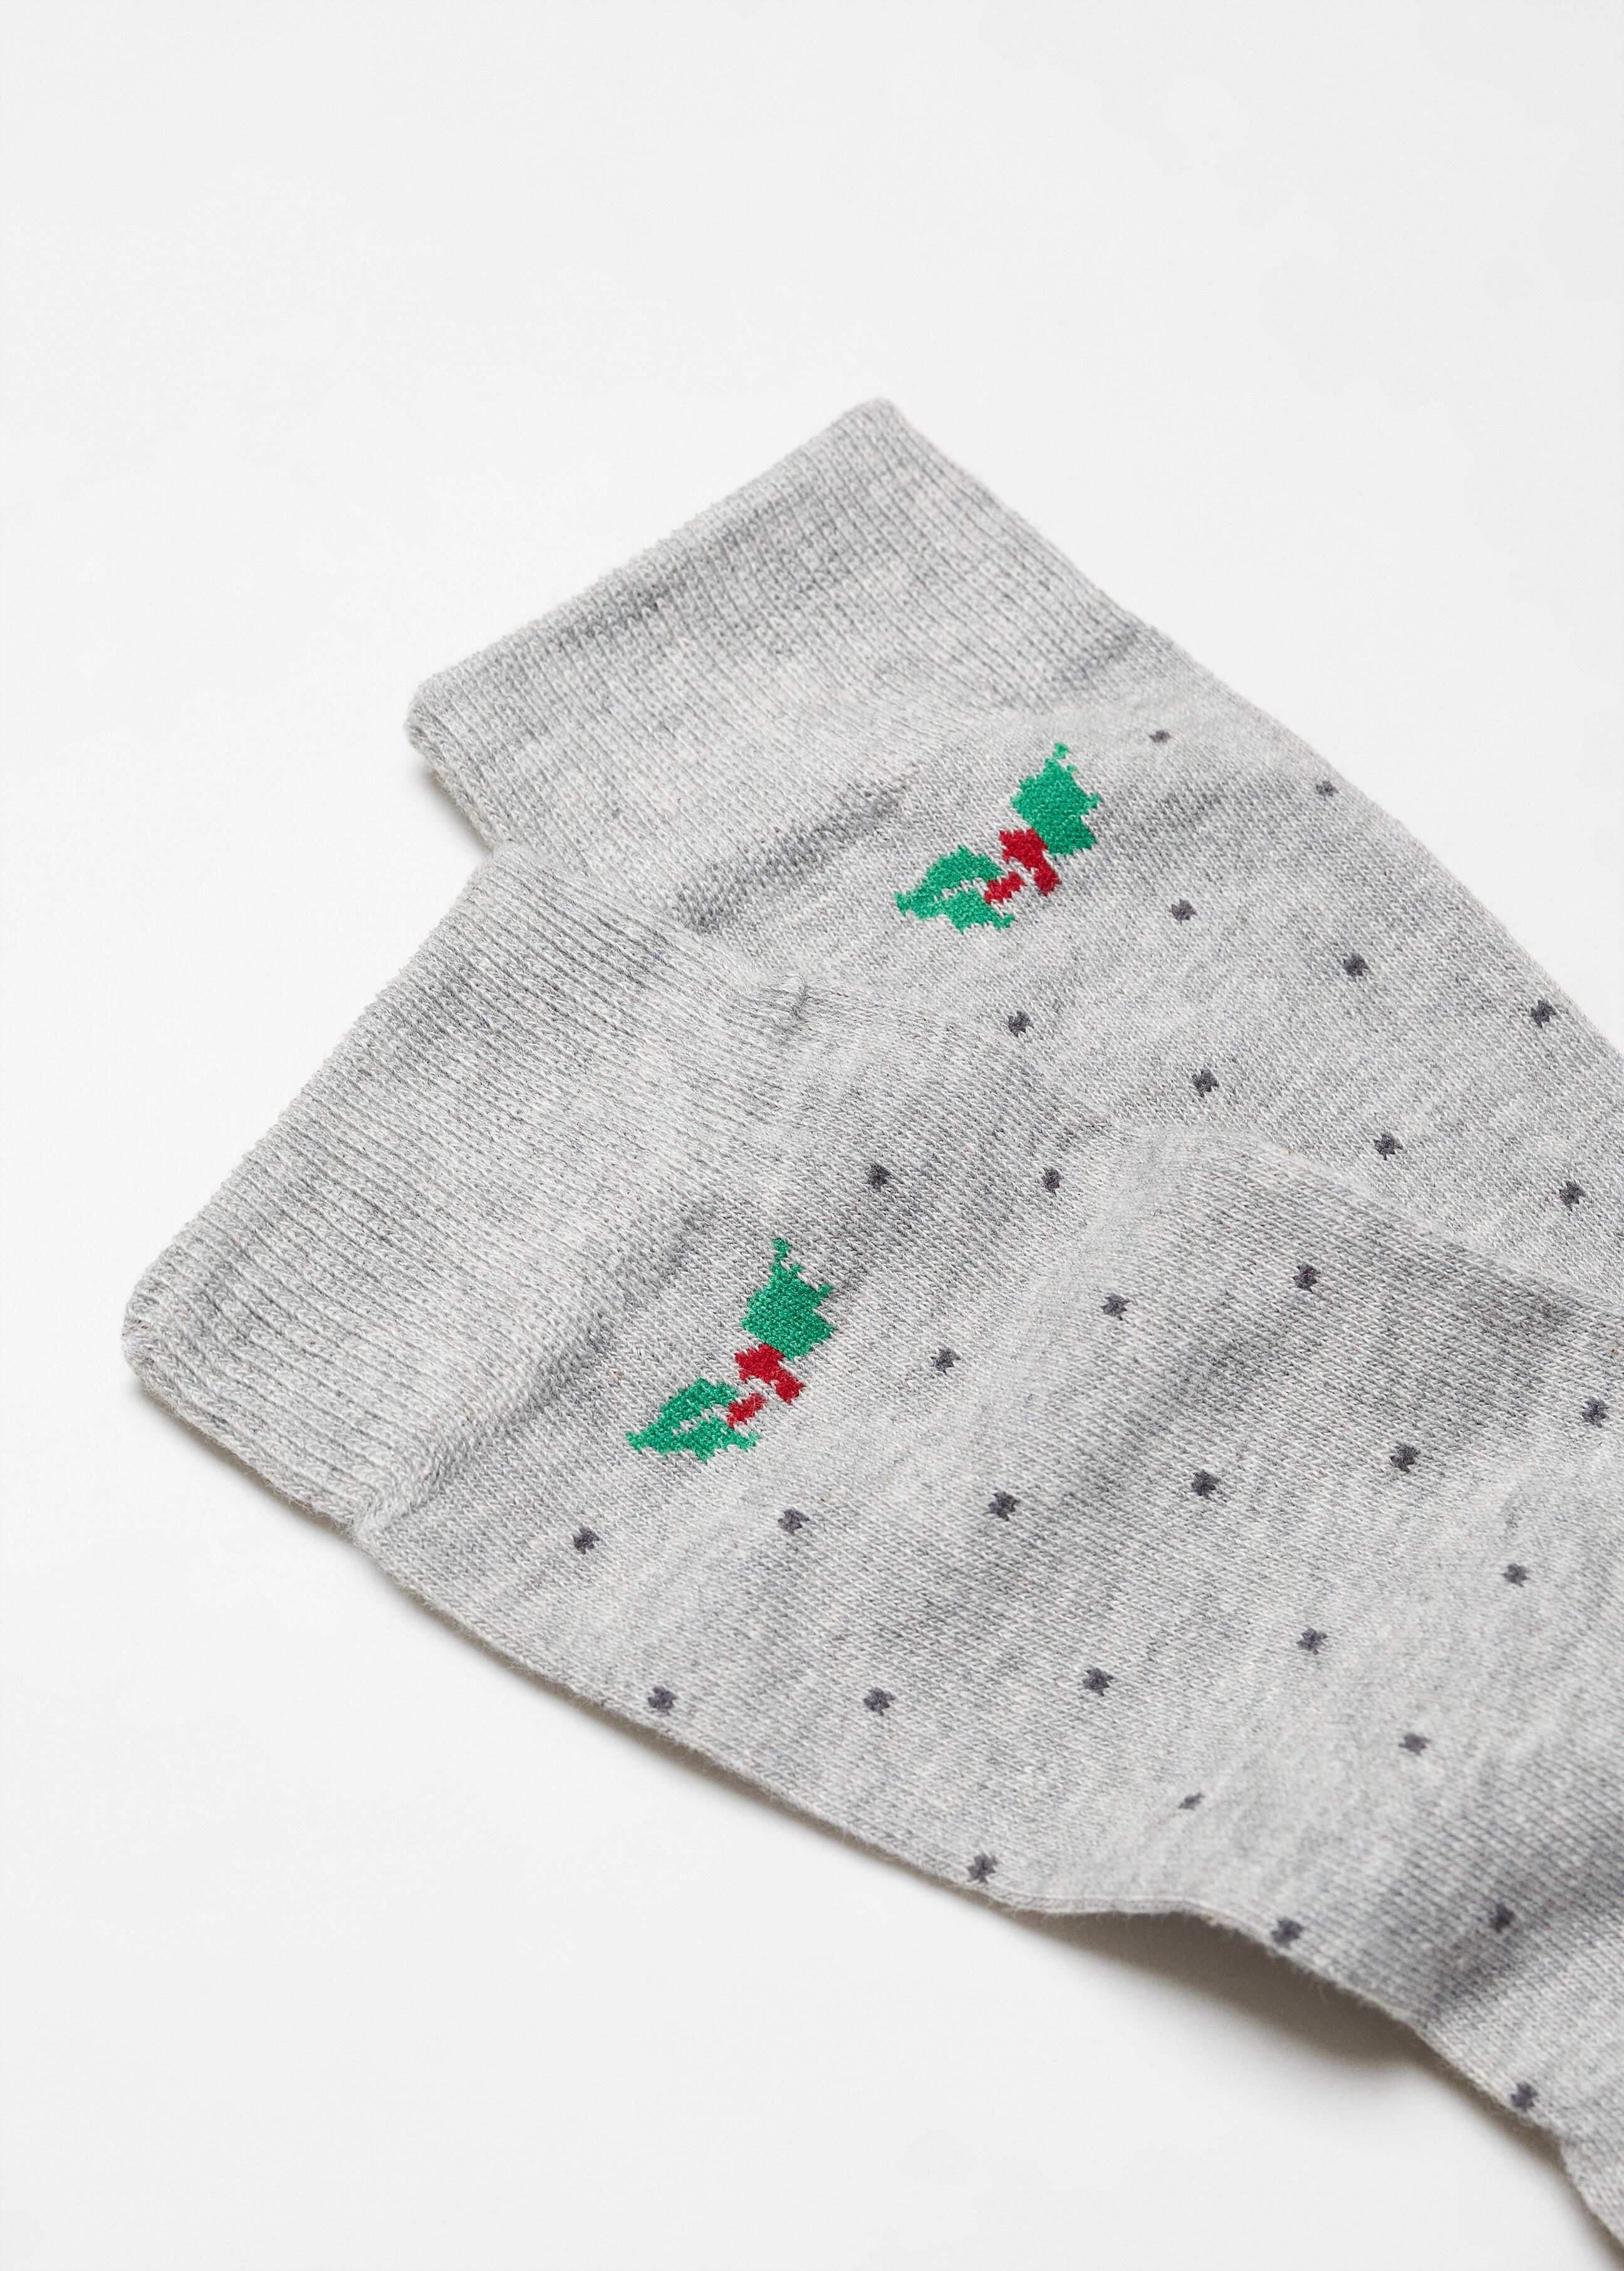 Christmas-print cotton socks - Details of the article 8